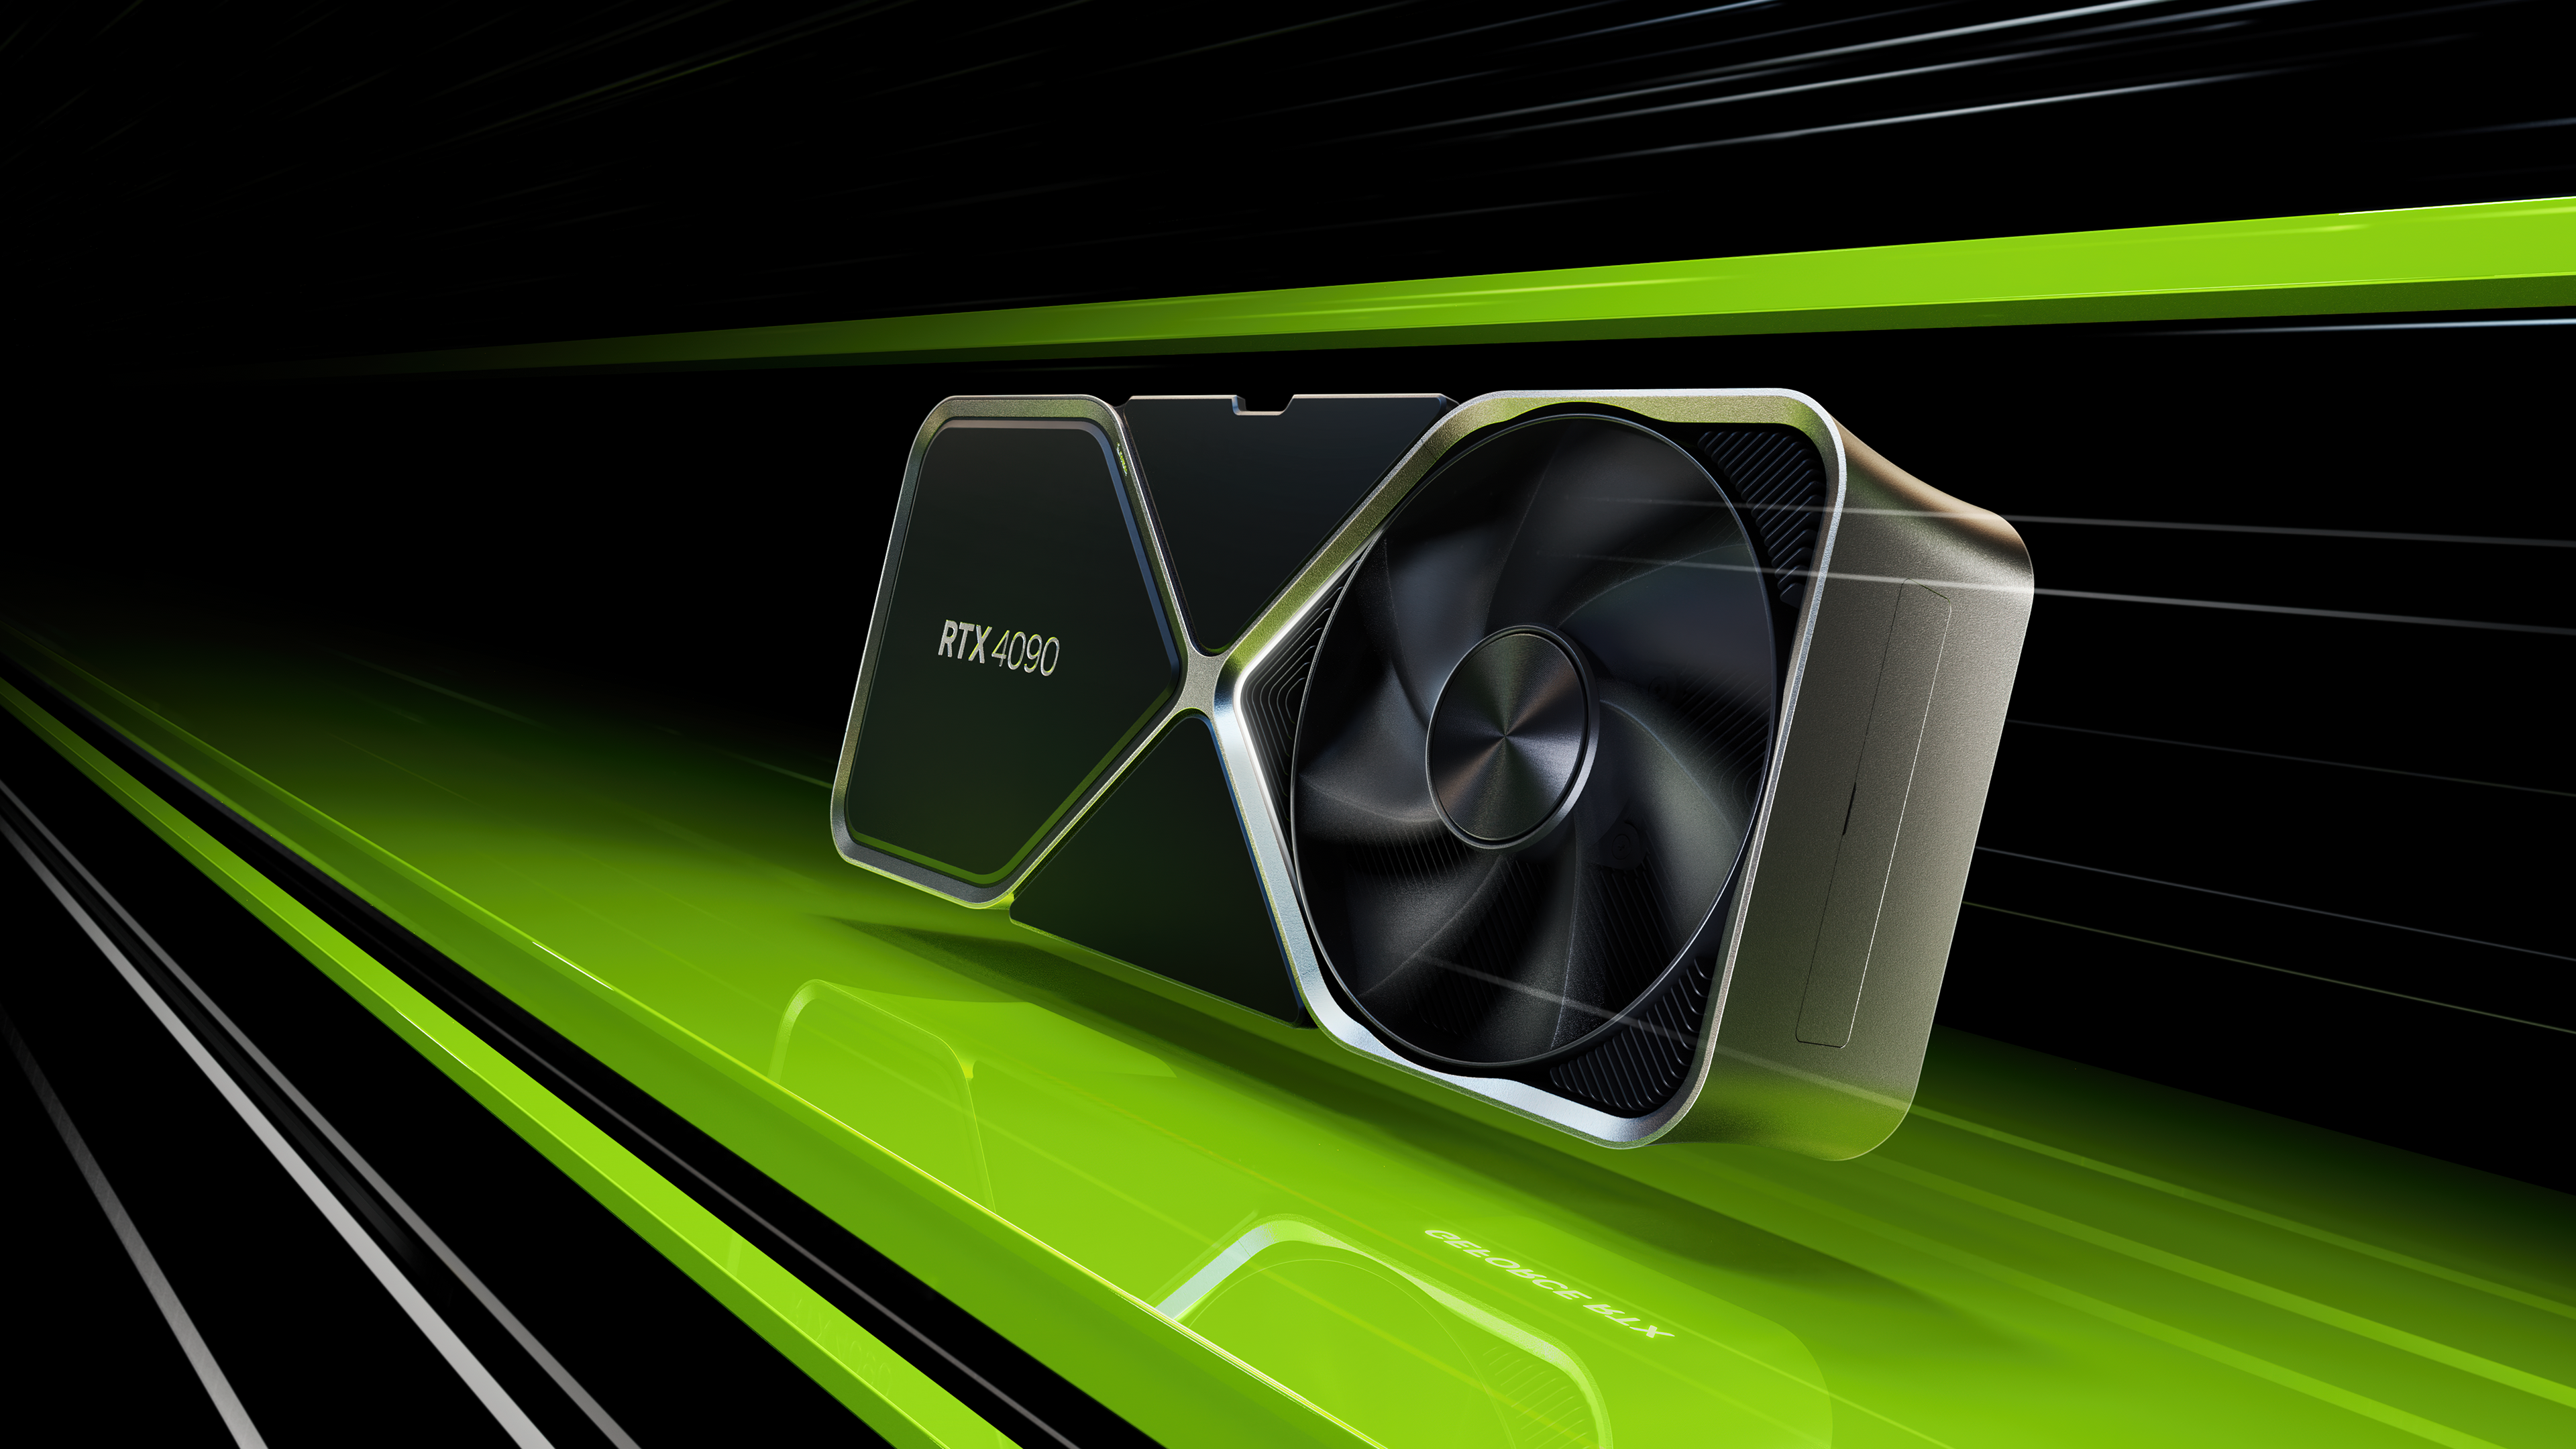 Image for Nvidia GeForce RTX 4090 review: a new level in graphics power